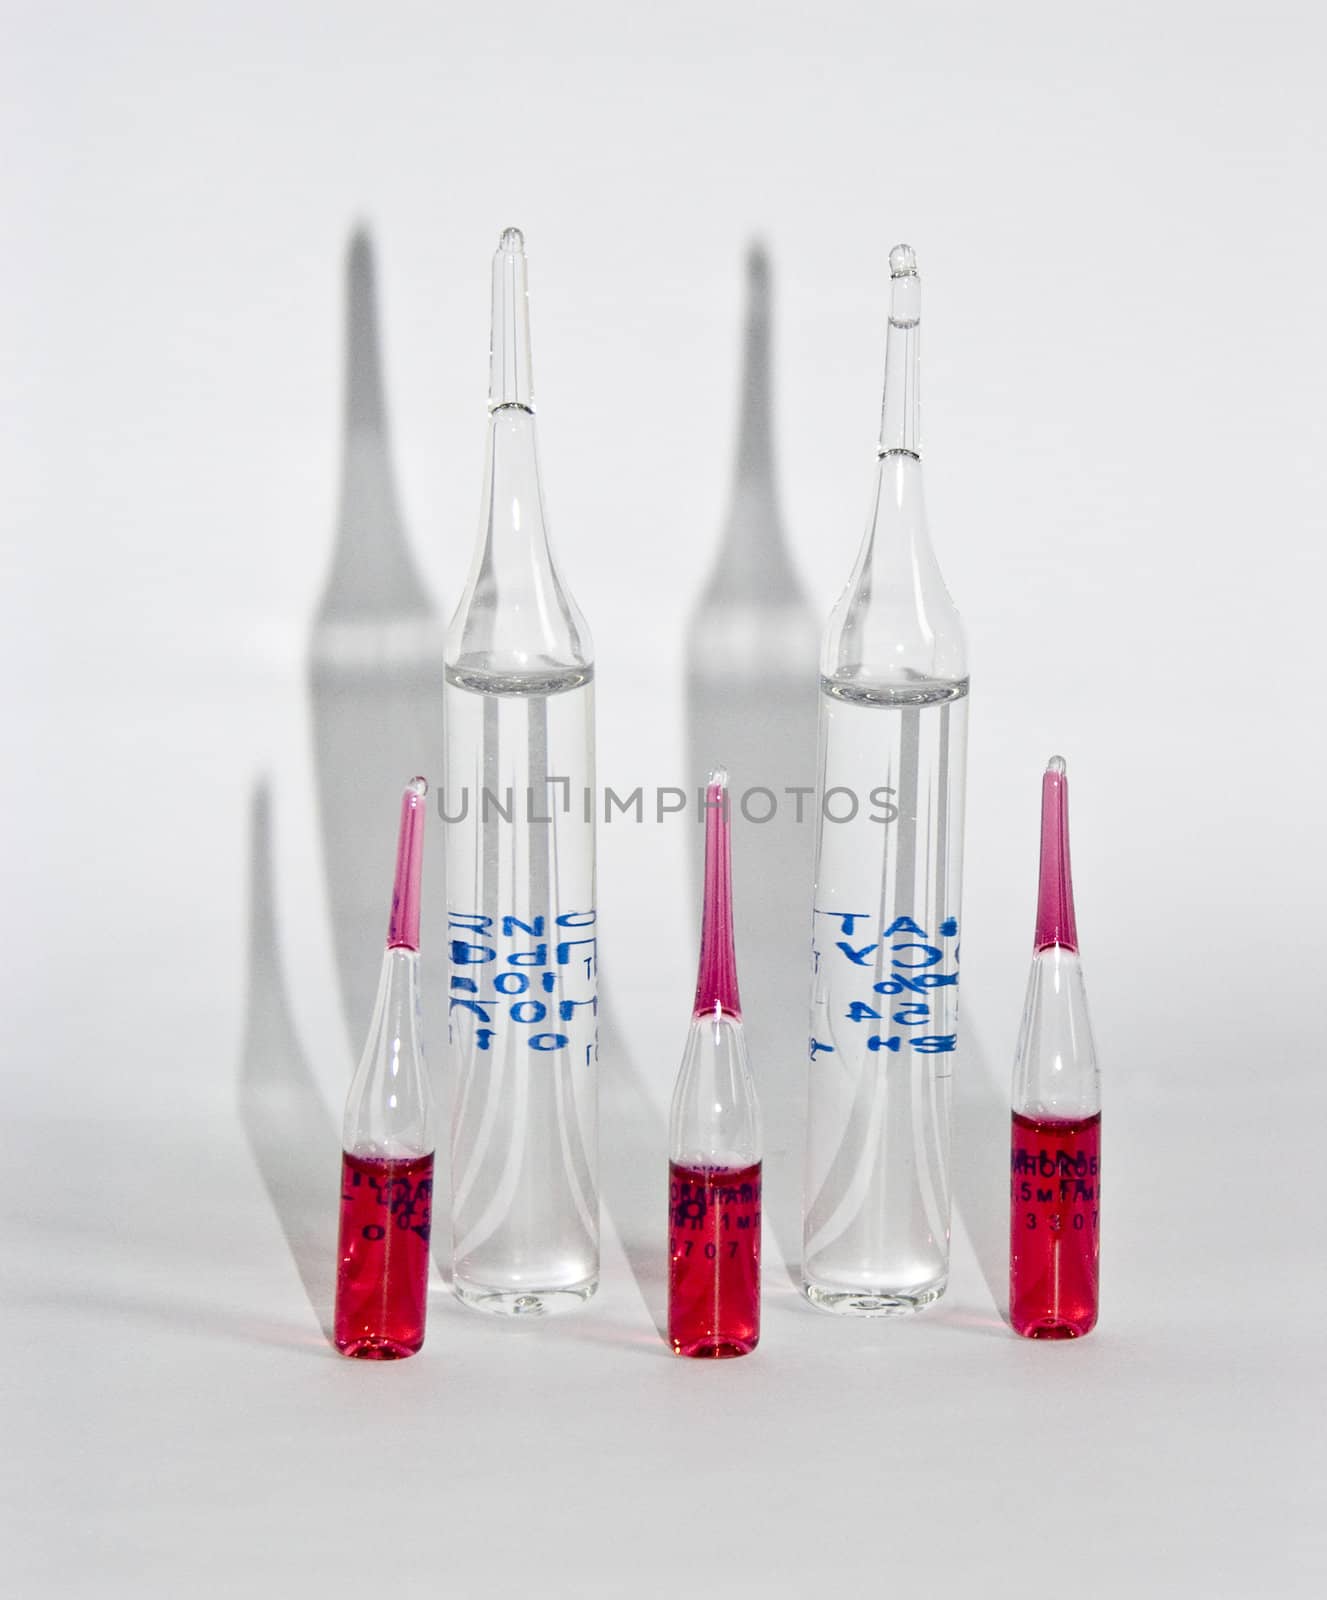 The image of ampoules on a white background